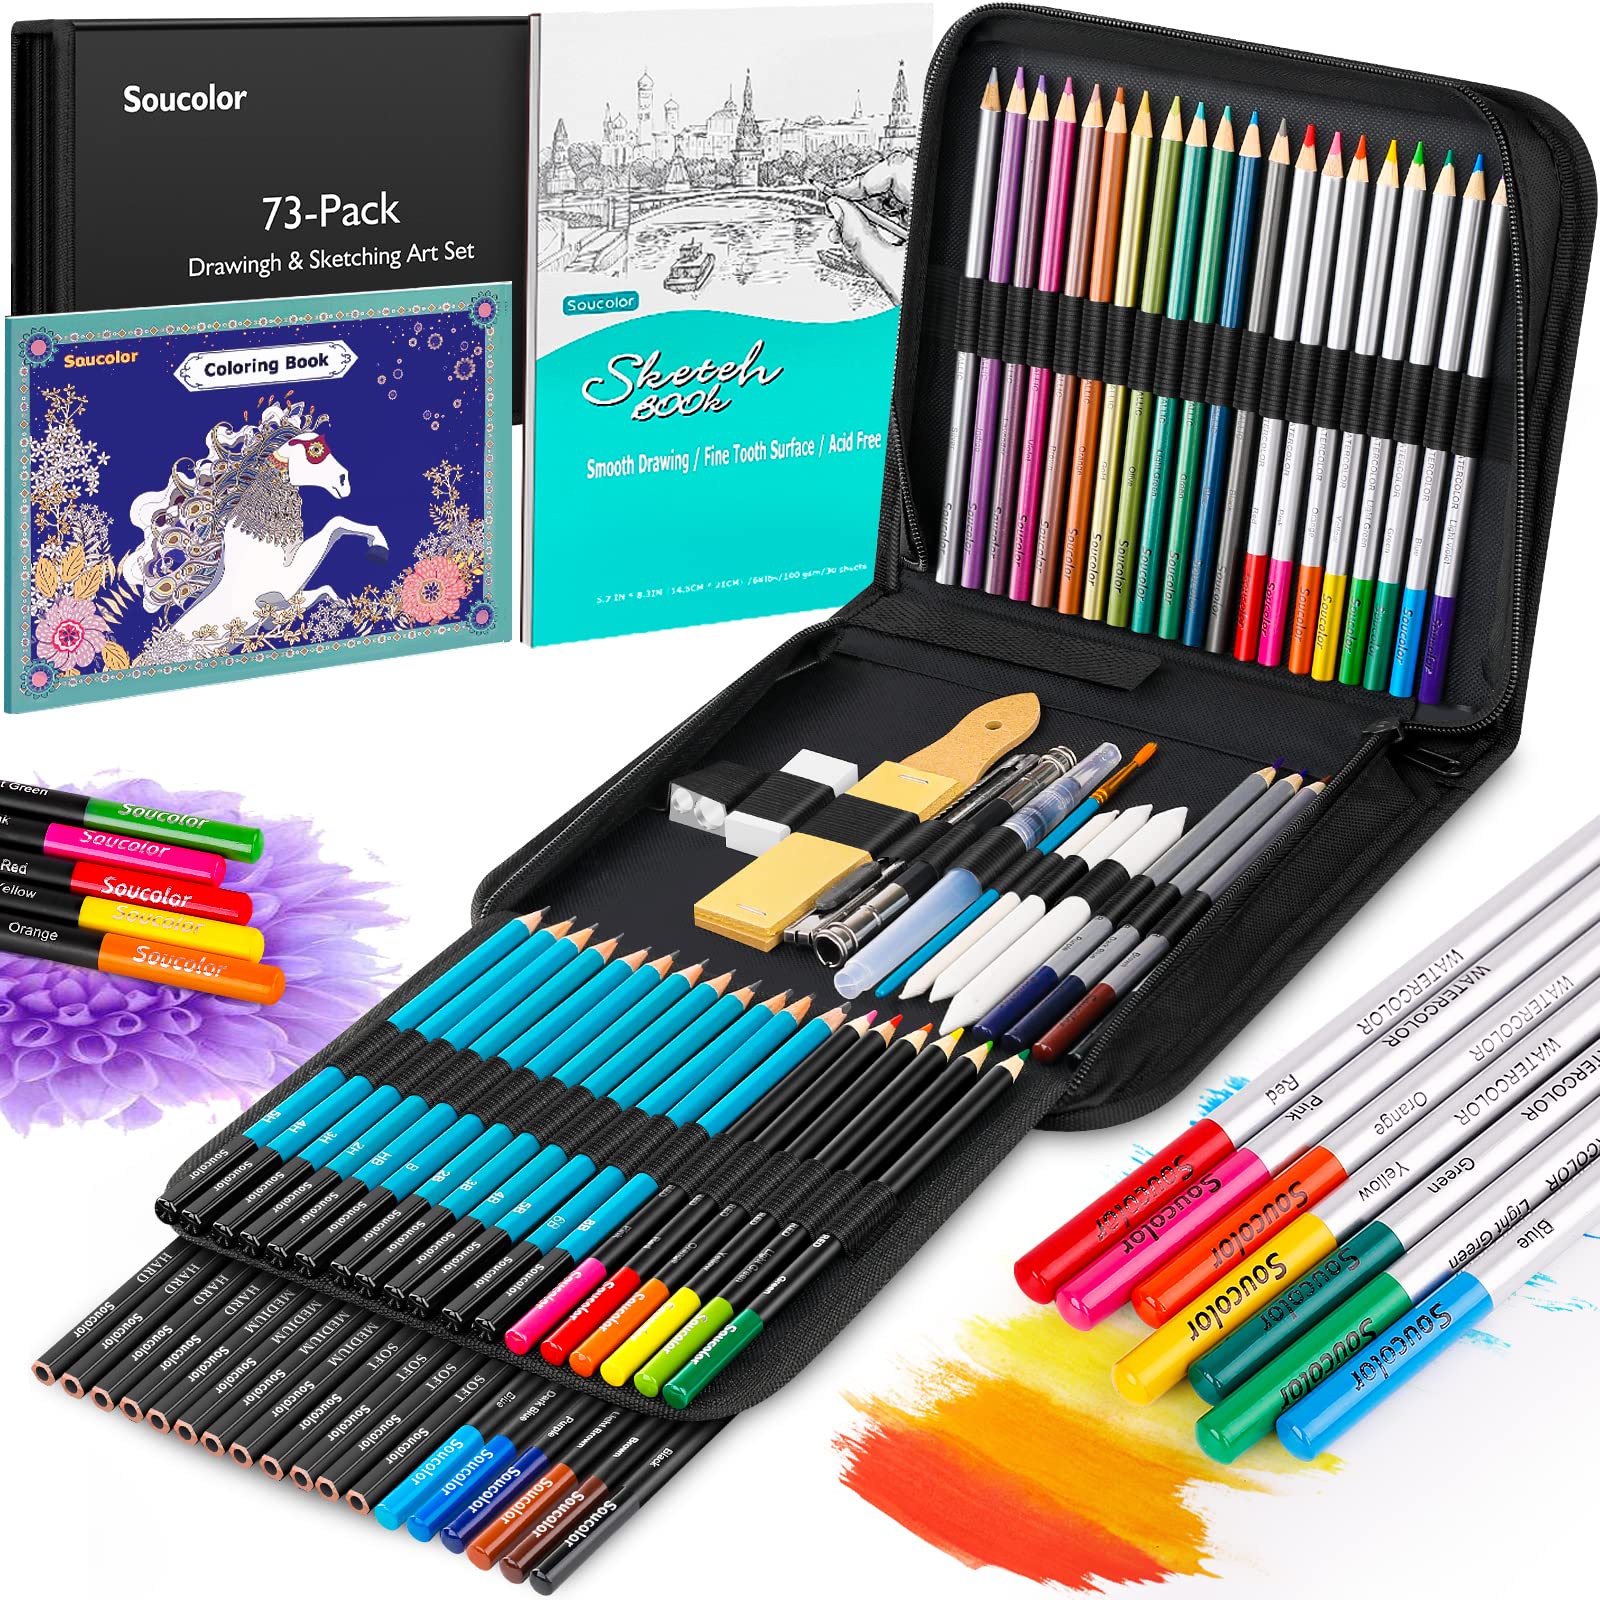 Shuttle Art 172 Colored Pencils, Soft Core Color Pencil Set for Adult  Coloring Books Artist Drawing Sketching Crafting